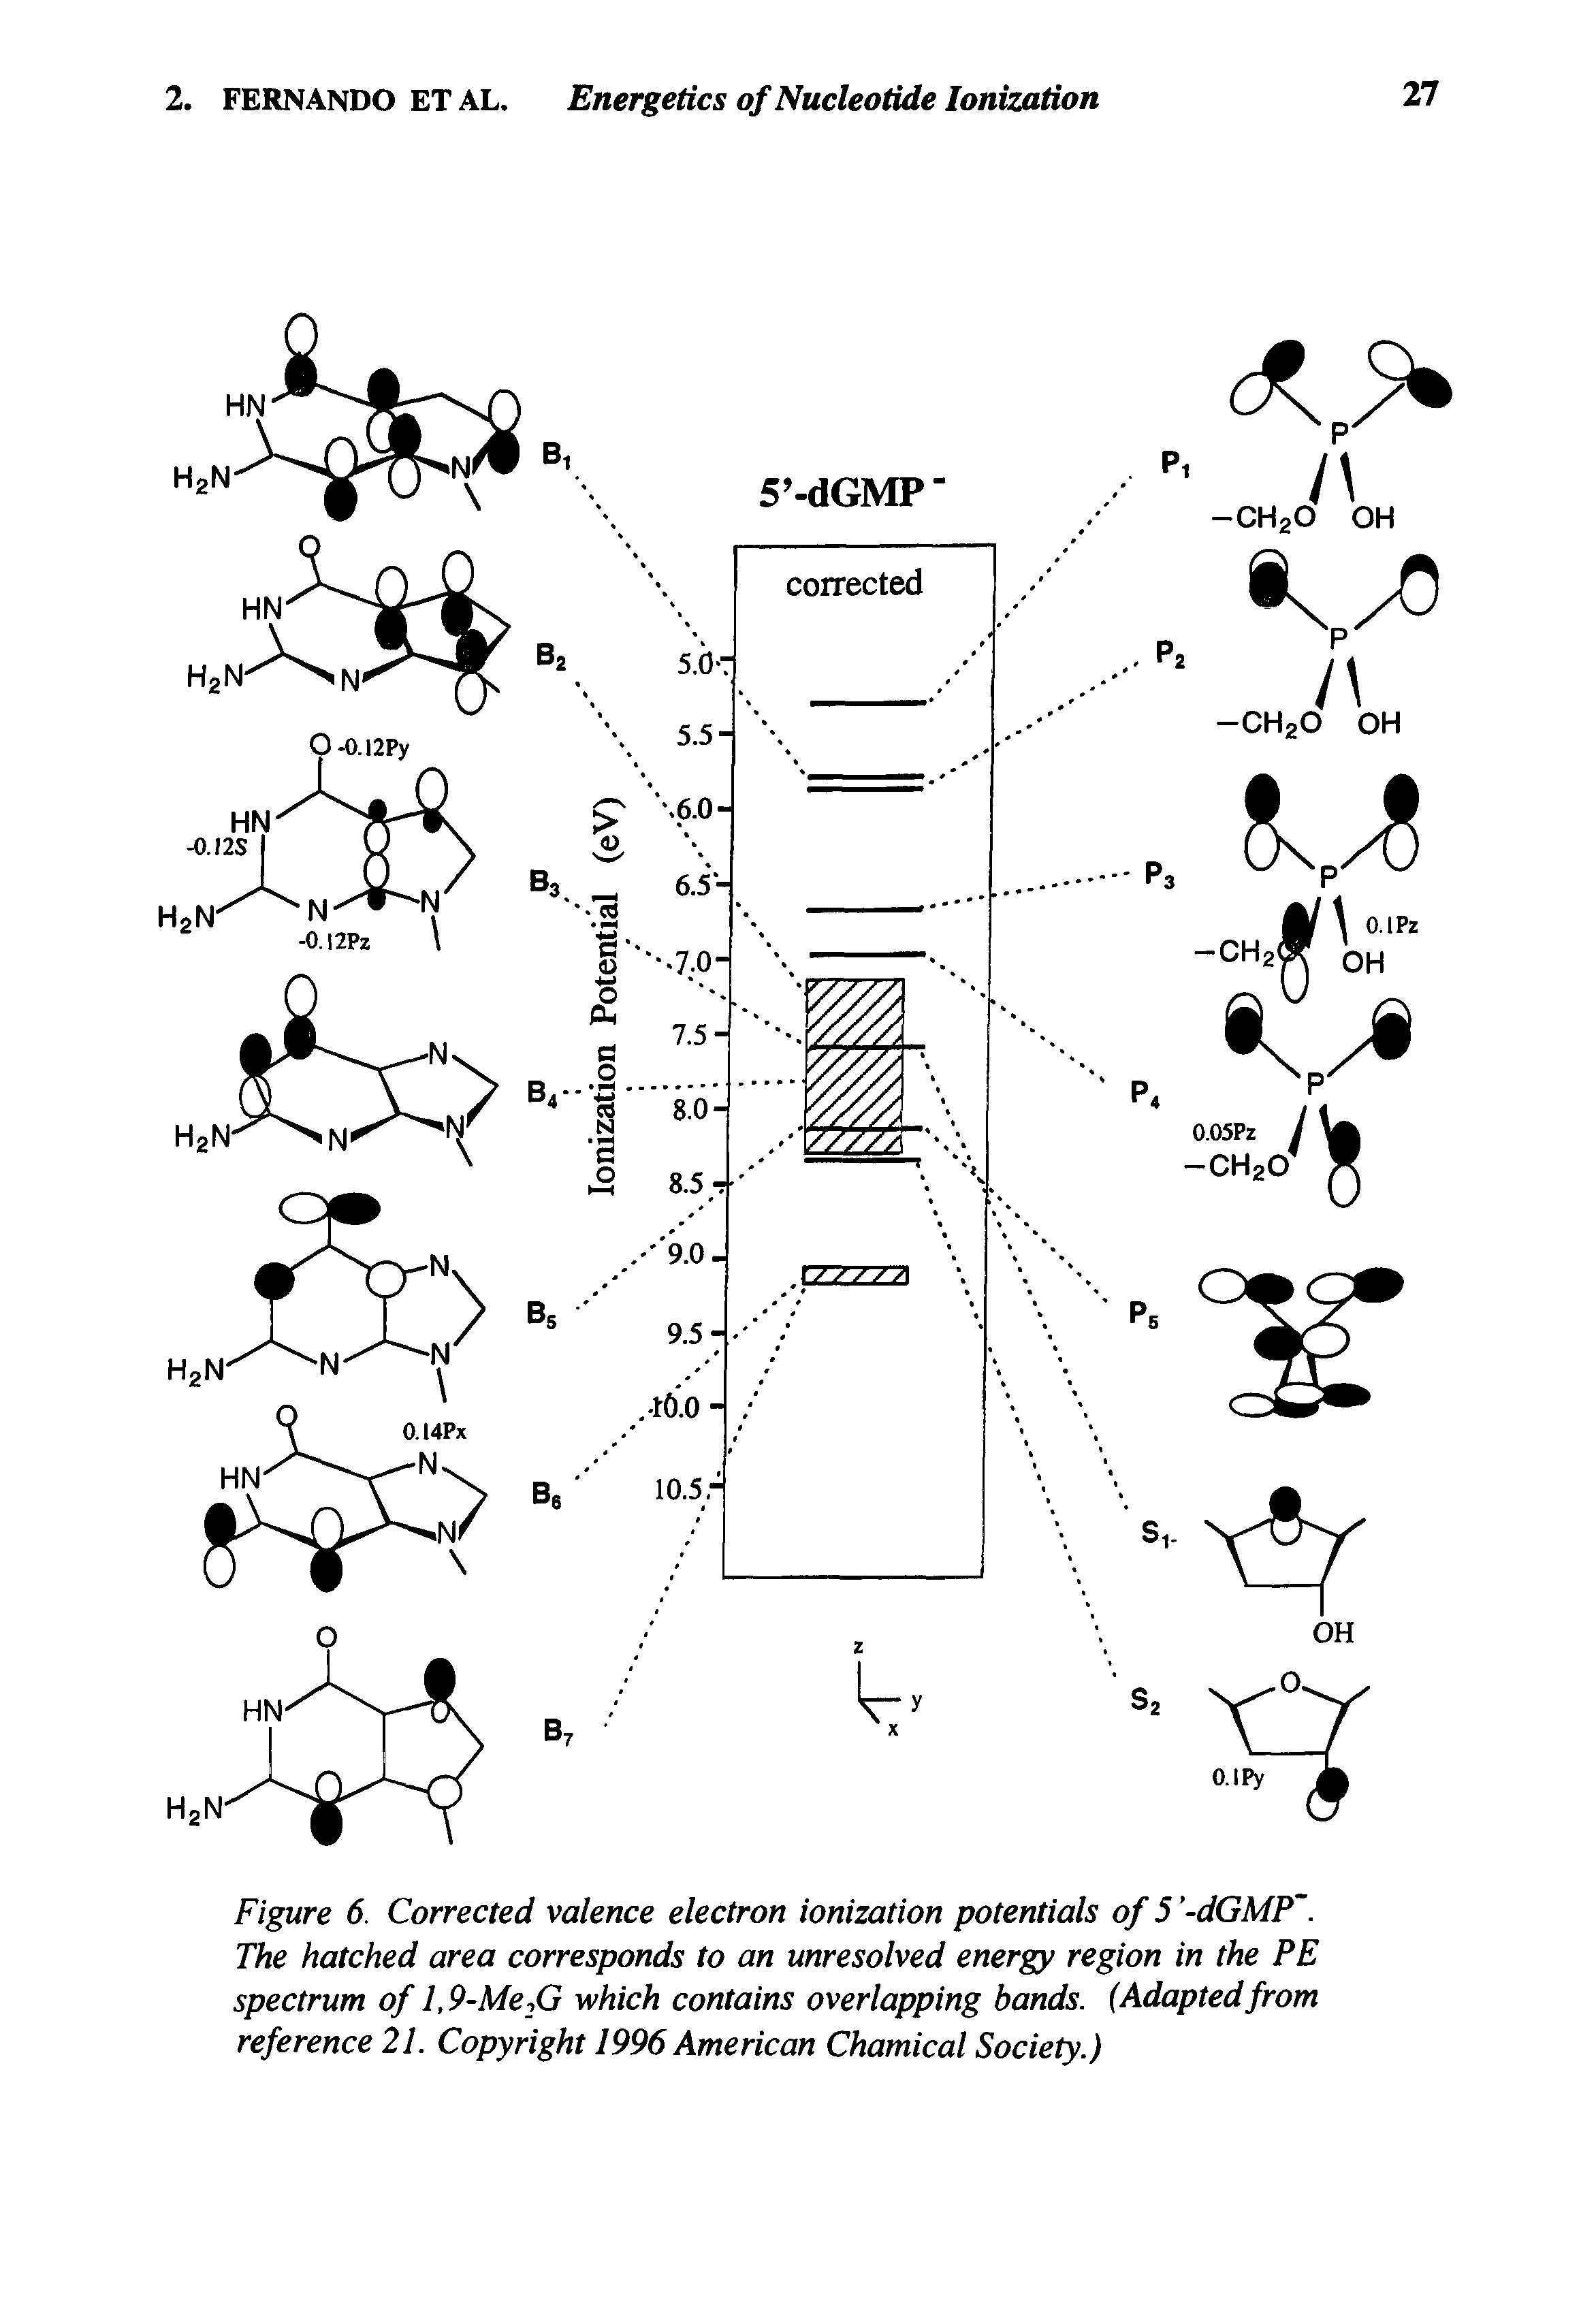 Figure 6. Corrected valence electron ionization potentials of 5 -dGMP. The hatched area corresponds to an unresolved energy region in the PE spectrum of l,9-Me2G which contains overlapping bands. (Adaptedfrom reference 21. Copyright 1996 American Chamical Society.)...